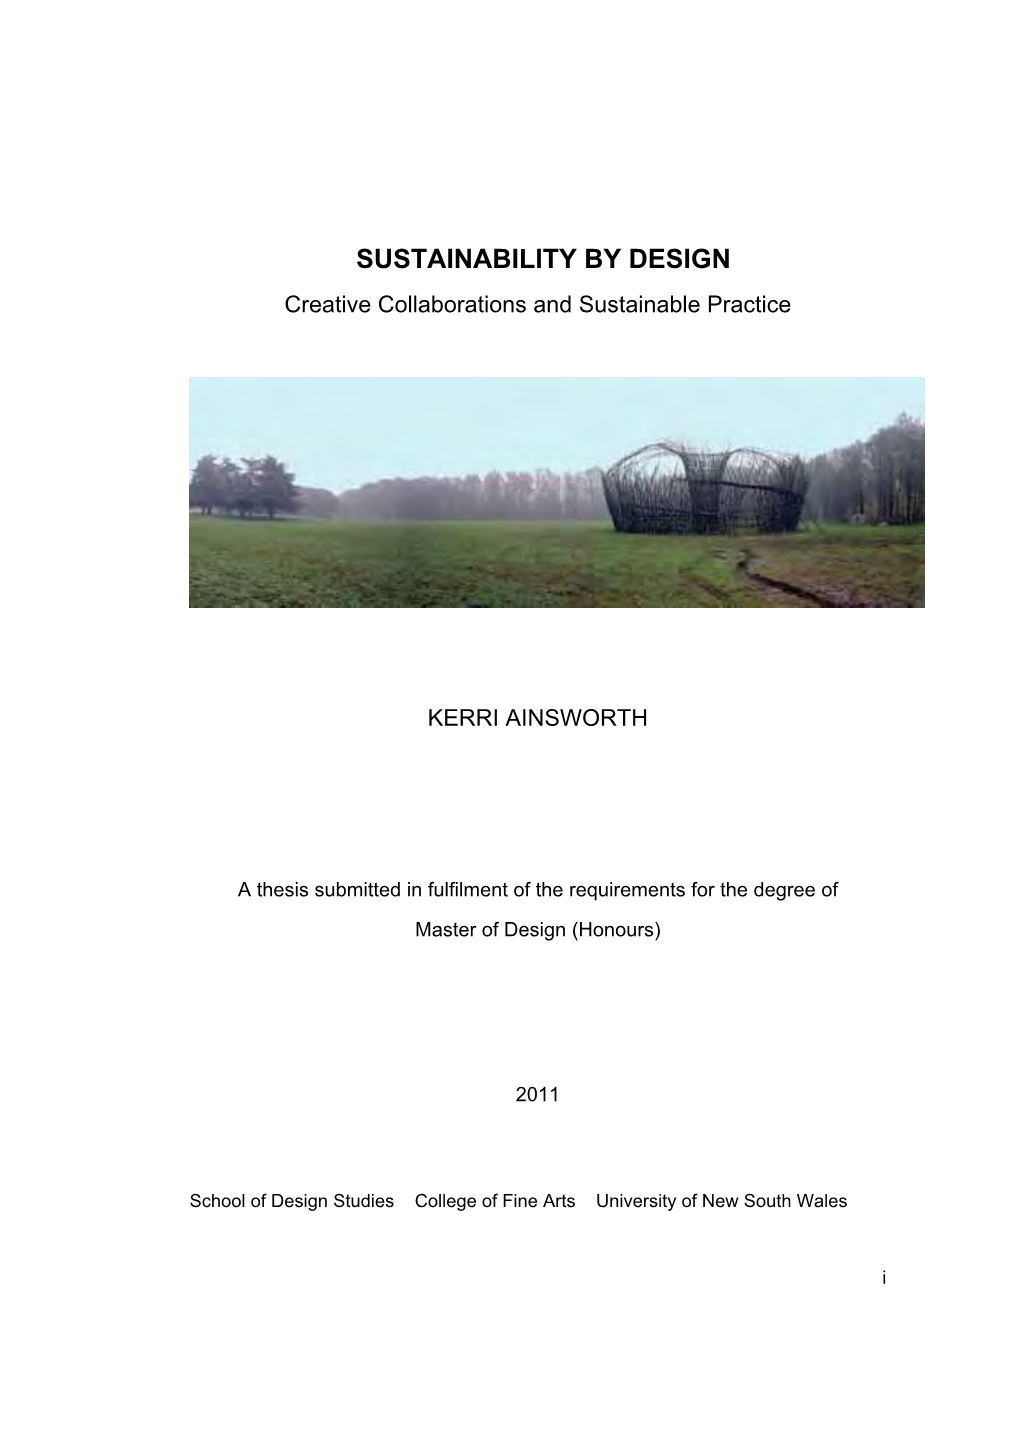 SUSTAINABILITY by DESIGN Creative Collaborations and Sustainable Practice